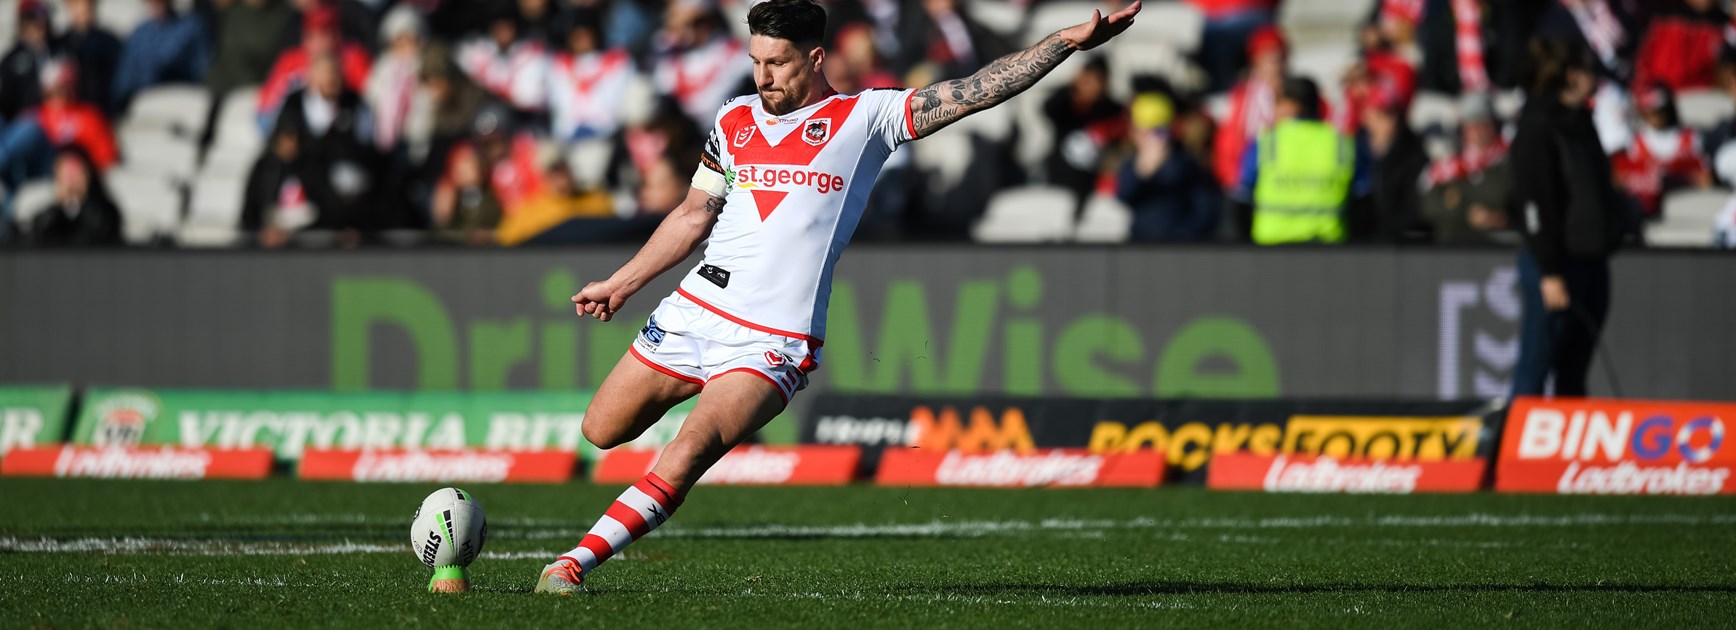 Five things: Round 23 v Roosters